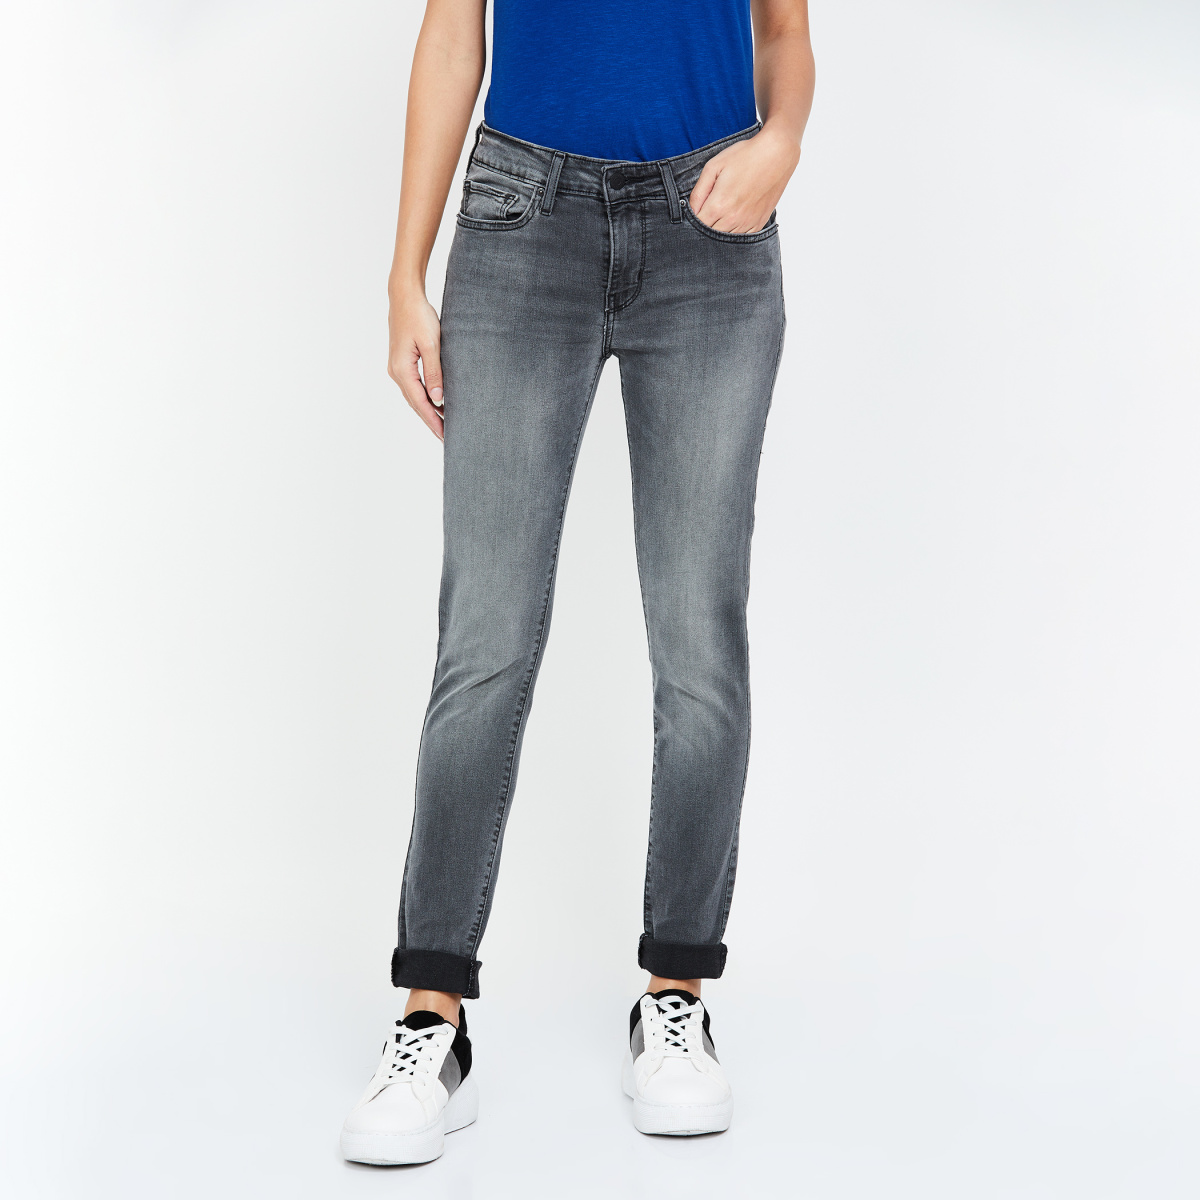 LEVI'S Stonewashed Skinny Fit Jeans